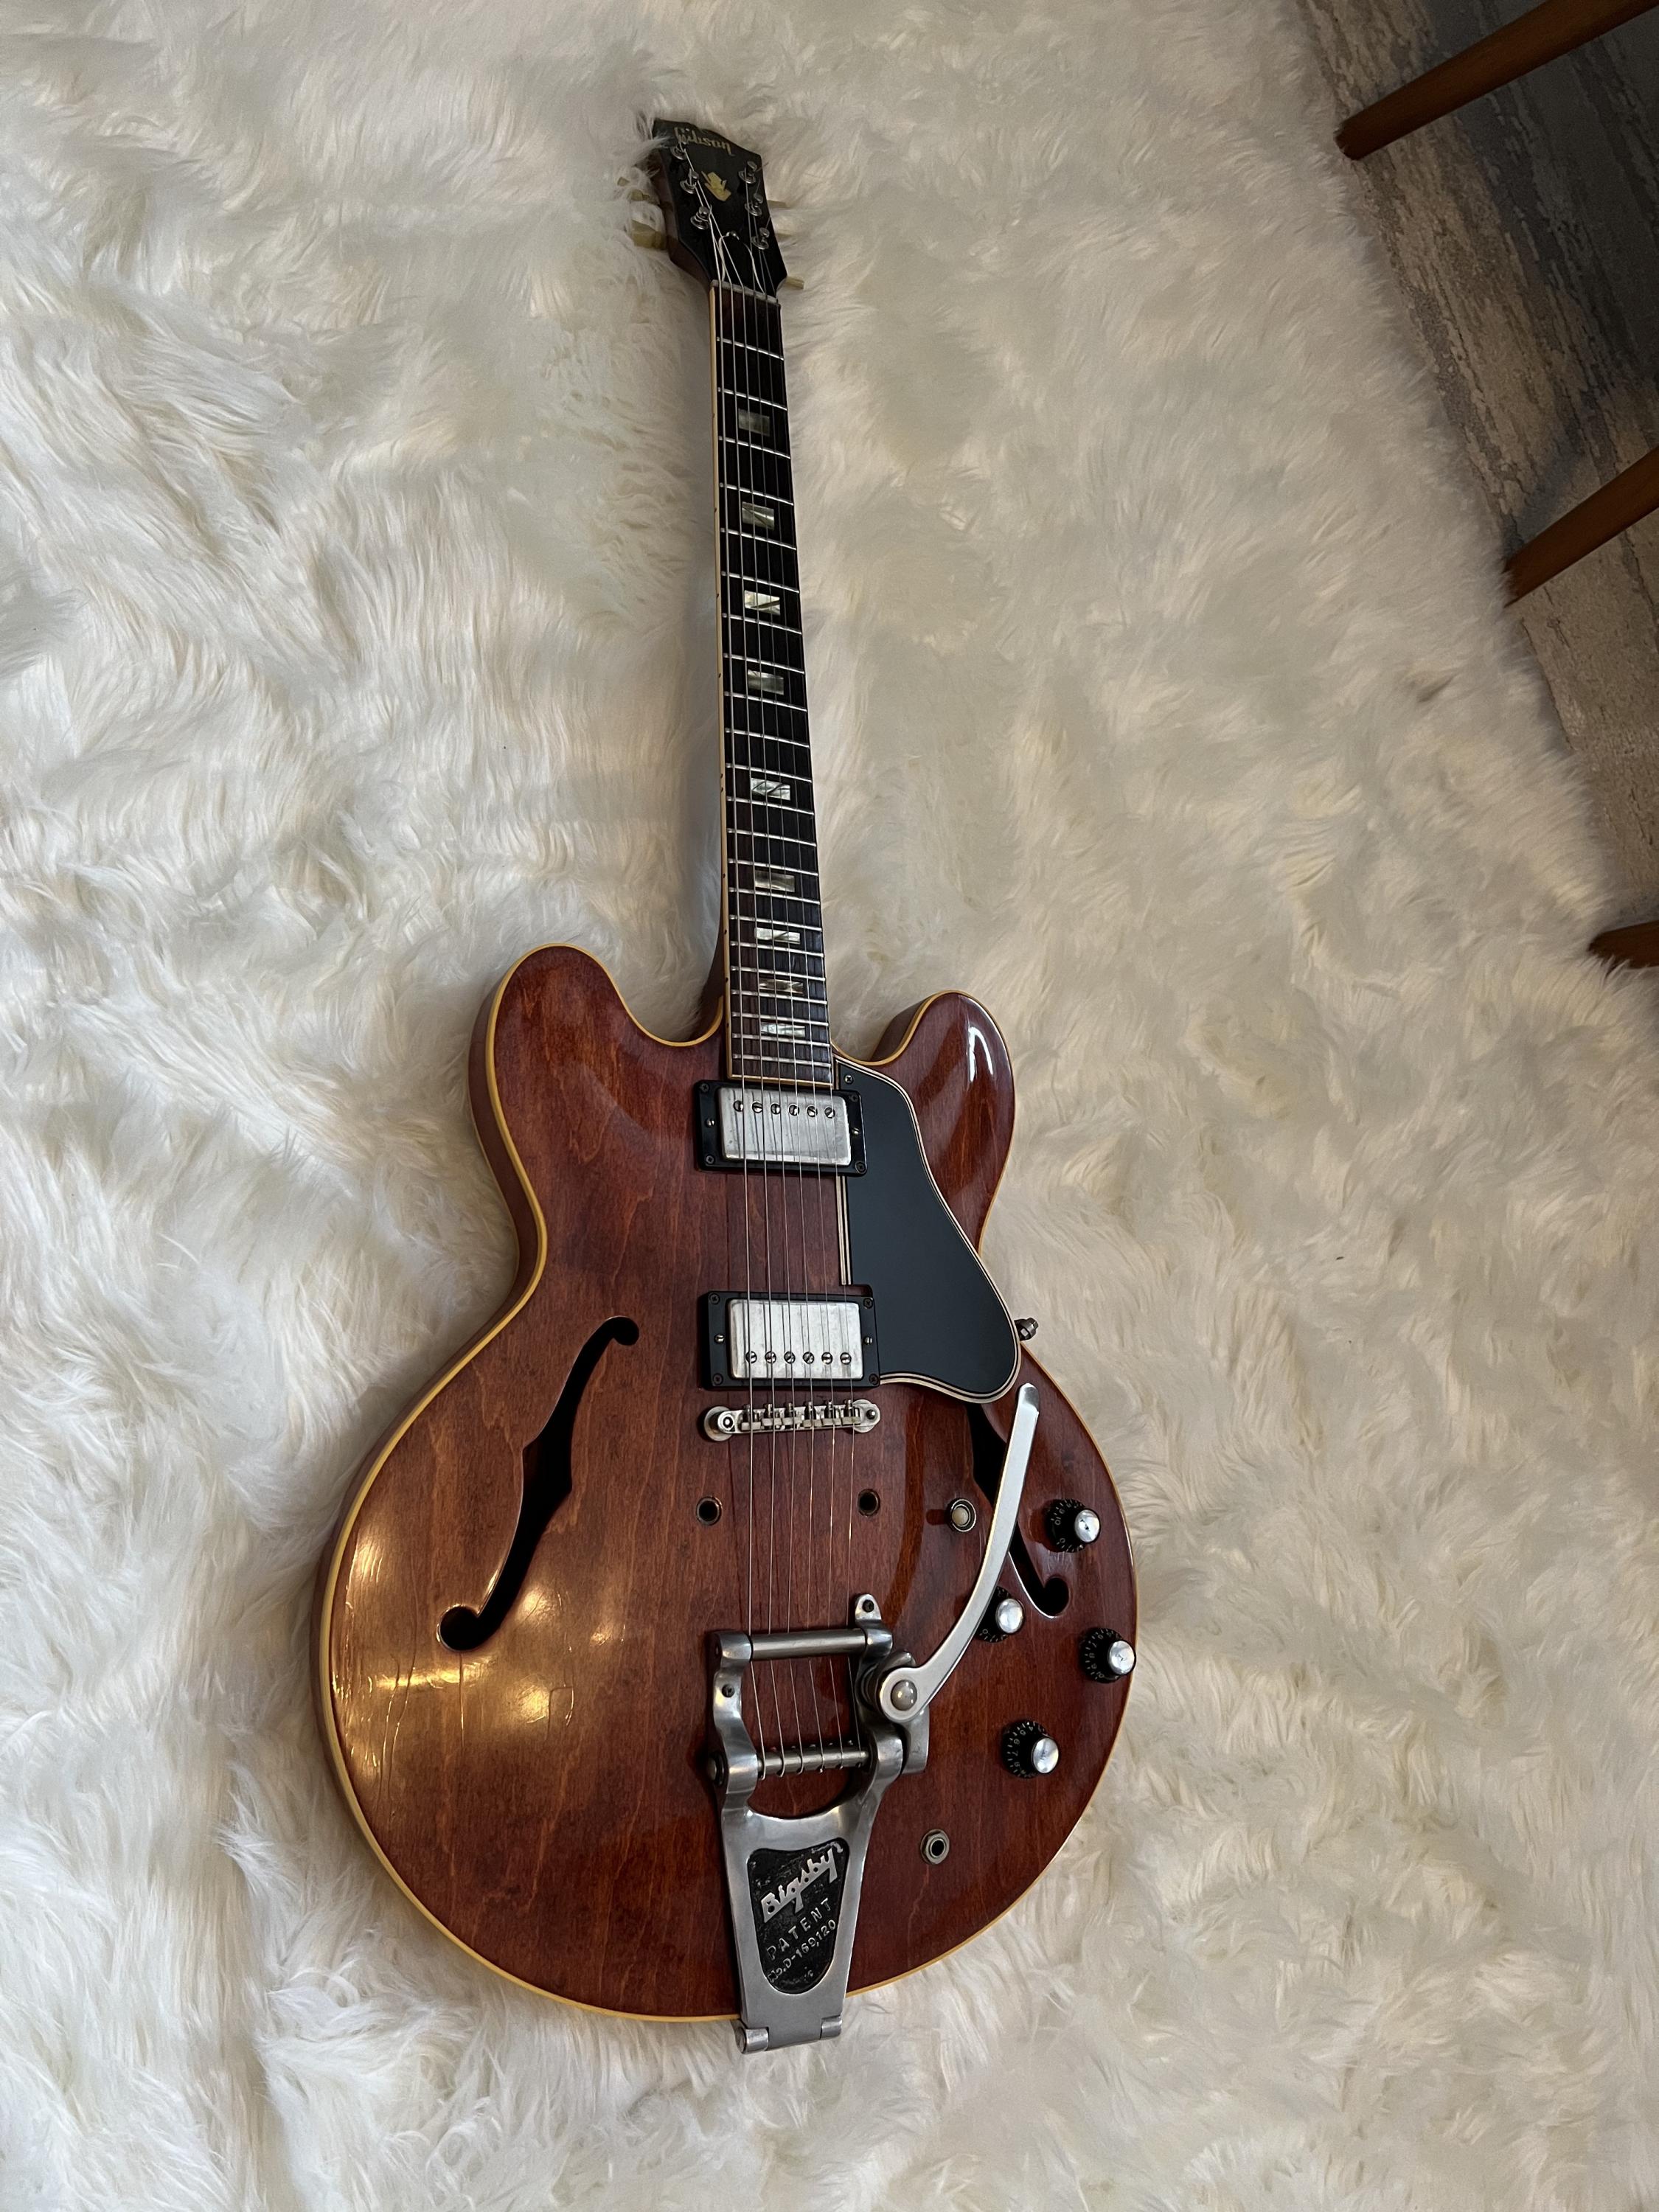 Share your ES-335-335long-jpg